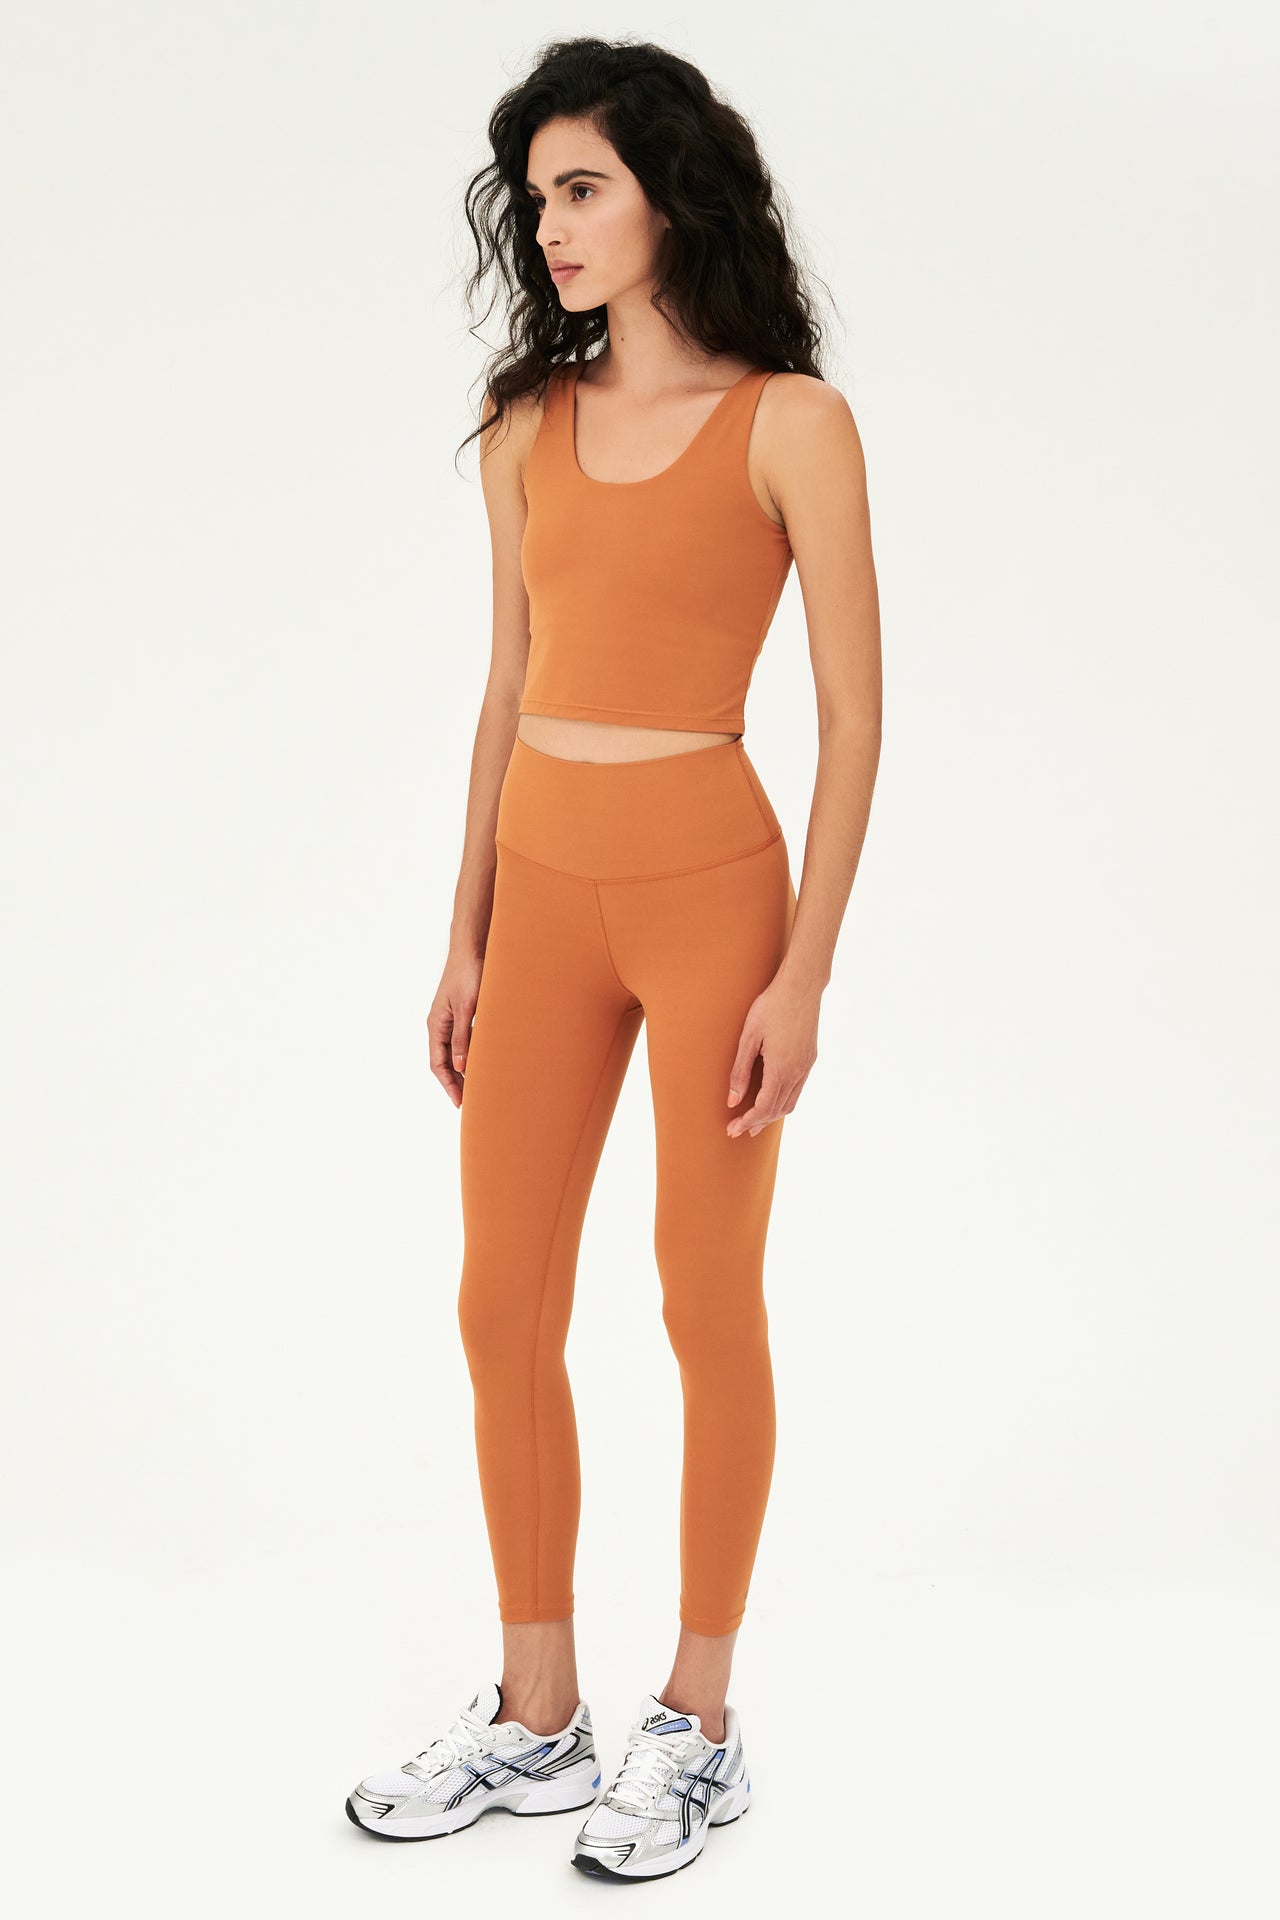 Front full side view of woman with curly dark brown hair wearing a dark orange bra tank with dark orange high waist leggings and white shoes with black stripes